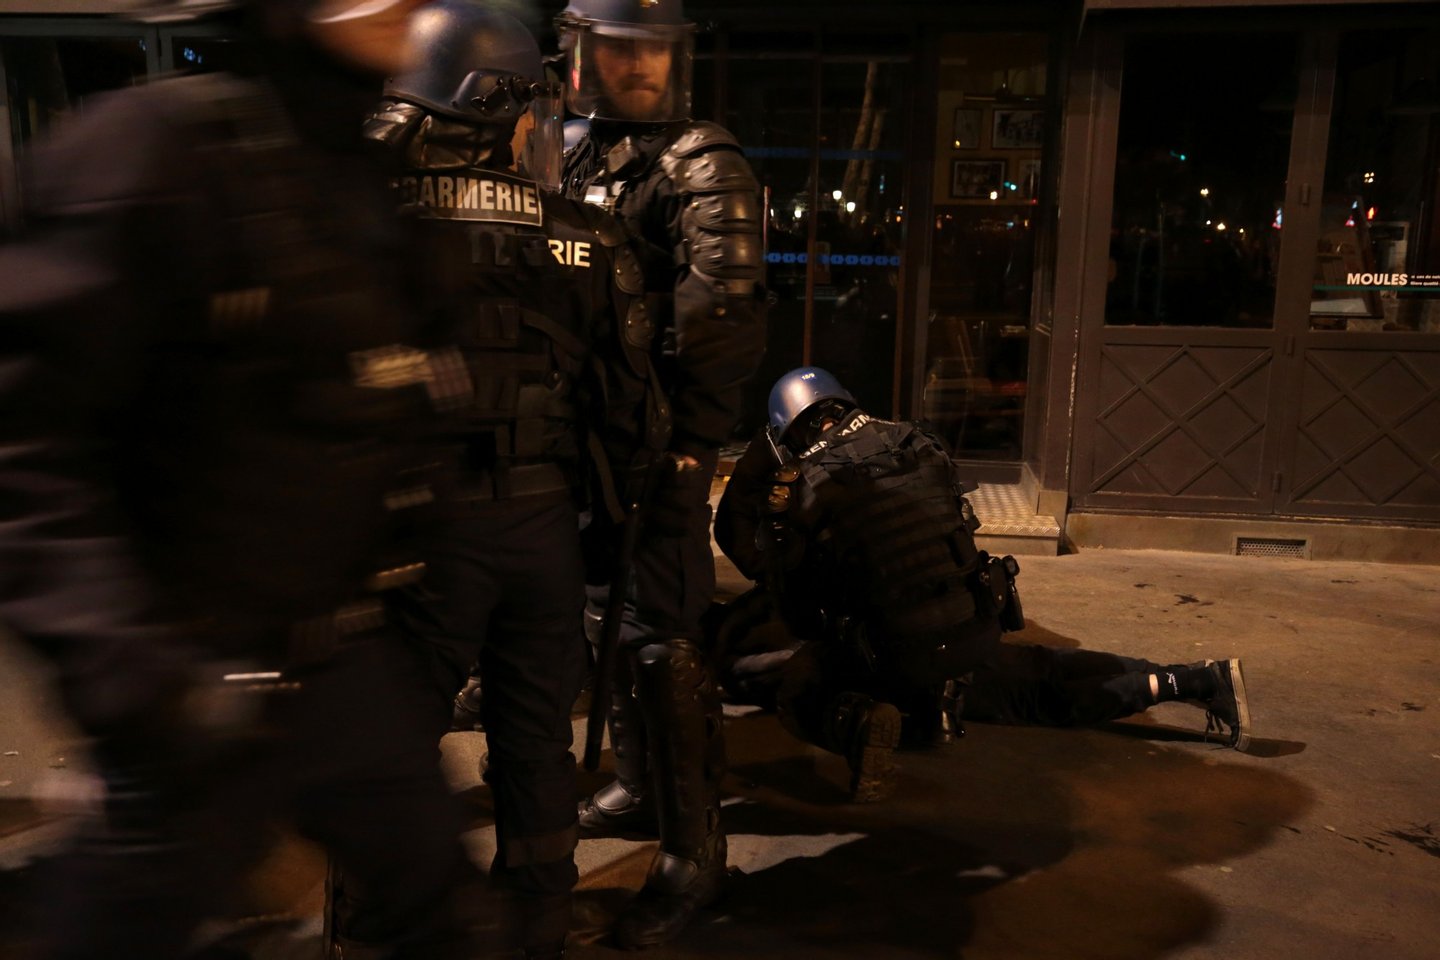 French Gendarmerie arrest a person as they clear the Place de la Republique in Paris during a protest by the Nuit Debout, or "Up All Night" movement who have been rallying against the French government's proposed labour reforms early on April 29, 2016. Twenty-seven people were arrested and 24 detained during the overnight clashes in the French capital as the police dispersed the protesters who began their began movement on March 31 in opposition to the government's proposed labour reforms. AFP PHOTO / JOEL SAGET / AFP / JOEL SAGET (Photo credit should read JOEL SAGET/AFP/Getty Images)